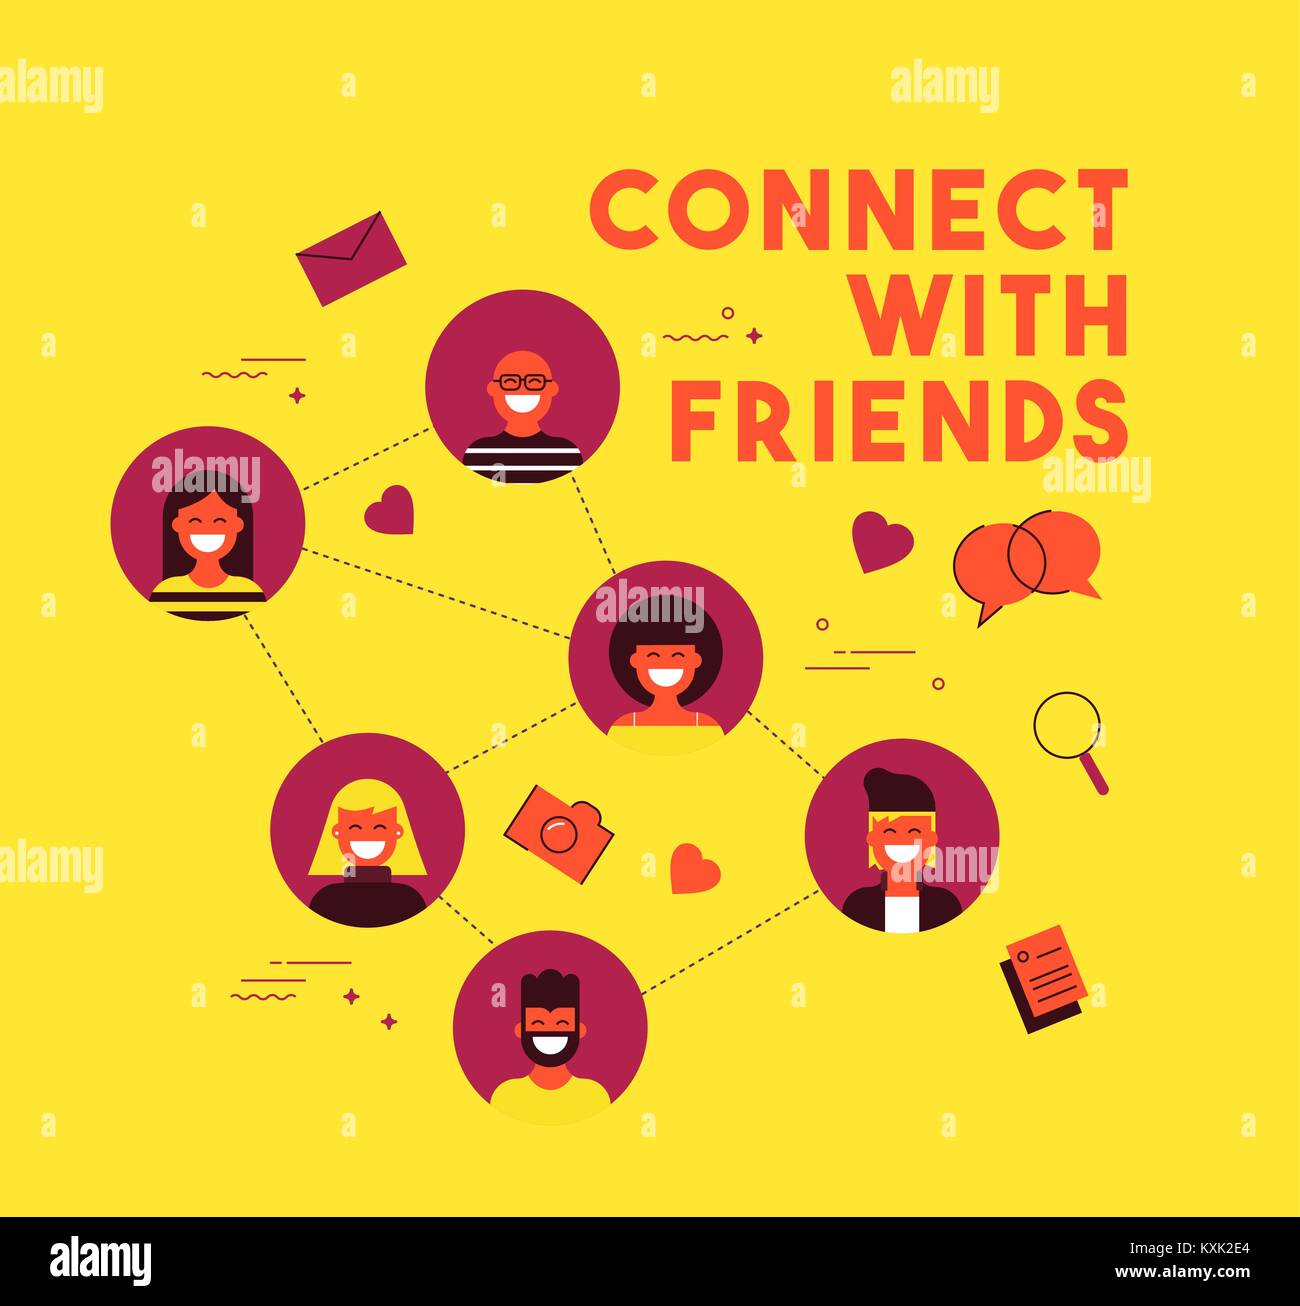 Connect with friends concept illustration in flat style. People group connected on social media network doing online internet activities. EPS10 vector Stock Vector